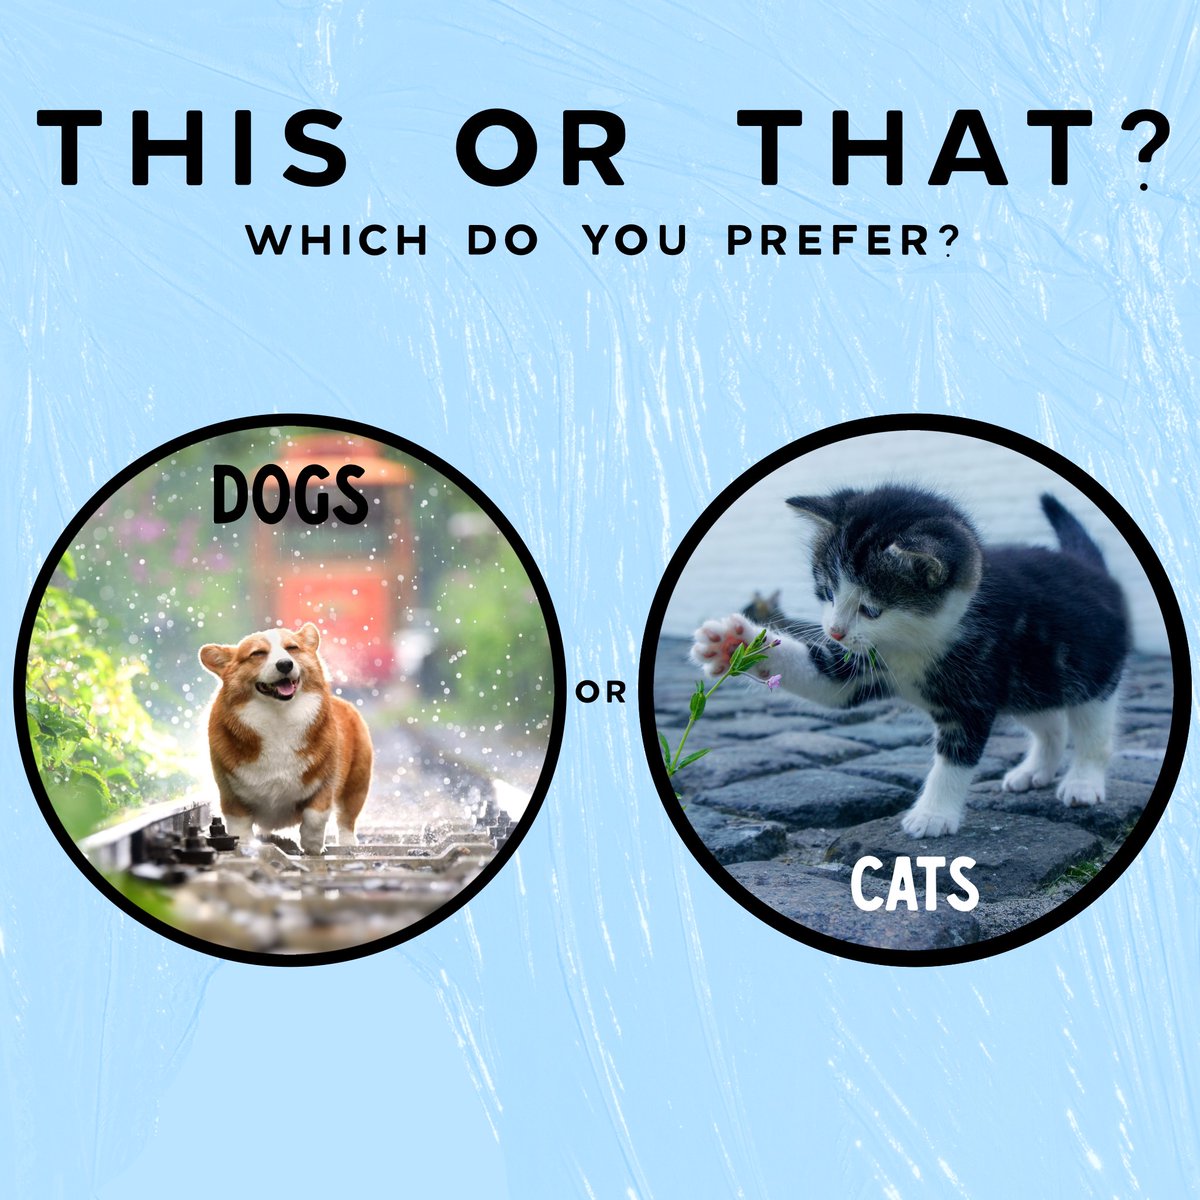 Which do you prefer? Let us know in the comments! #acop #americanconsumeropinion #surveysformoney #thisorthat #dogs #cats #animals #pets #thisorthatquestions